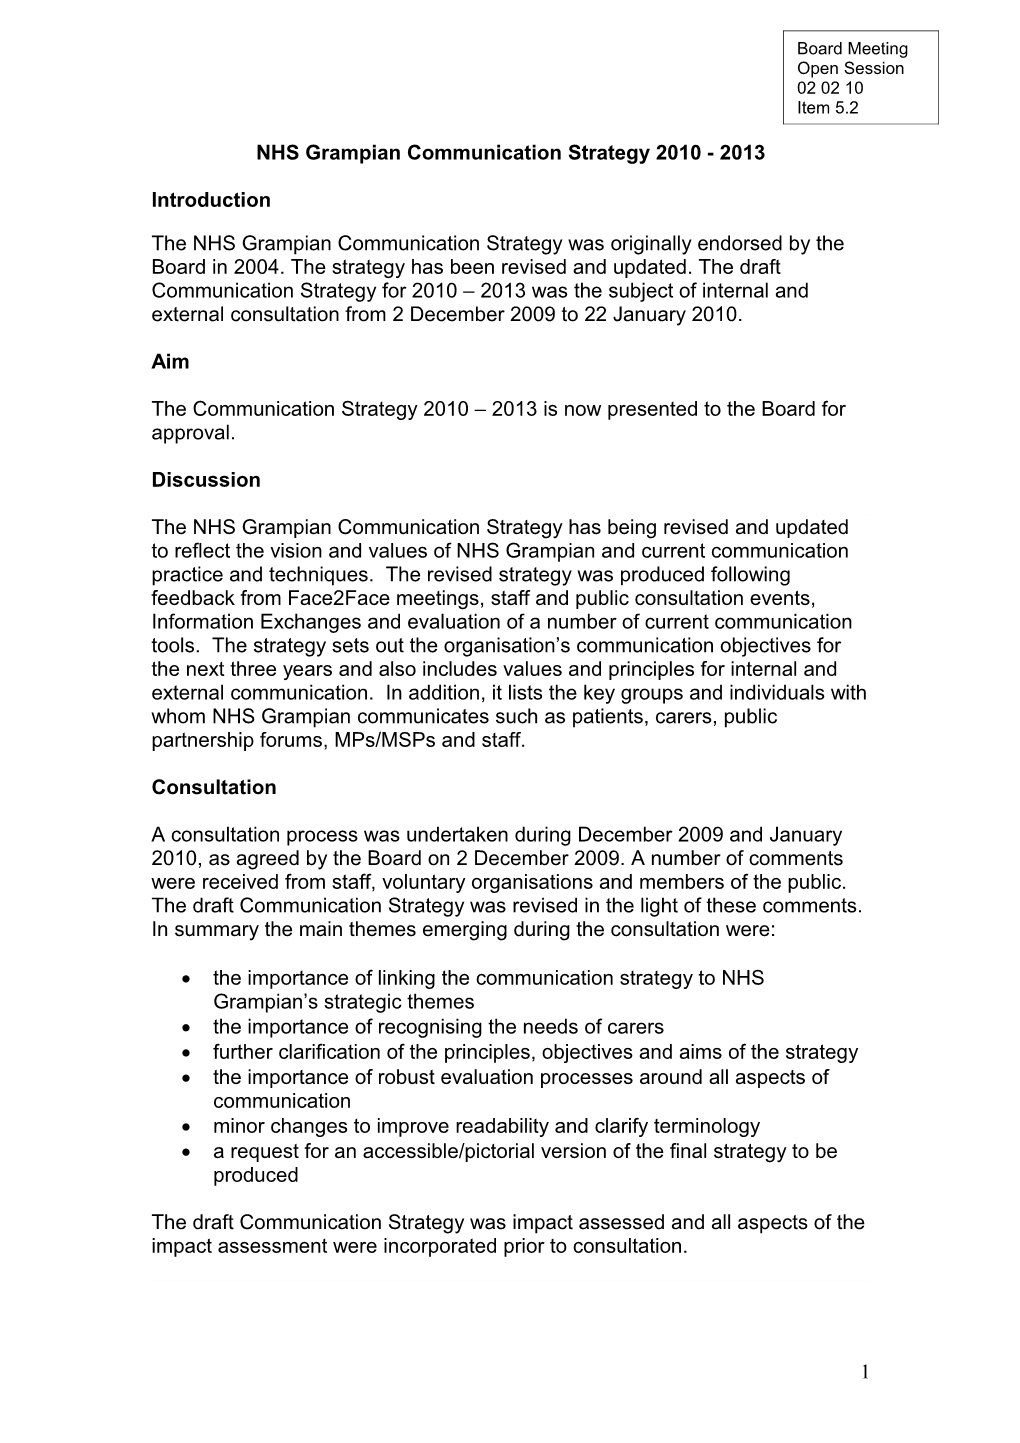 Item 5.2 for 2 Feb 10 Communication Strategy Front Page